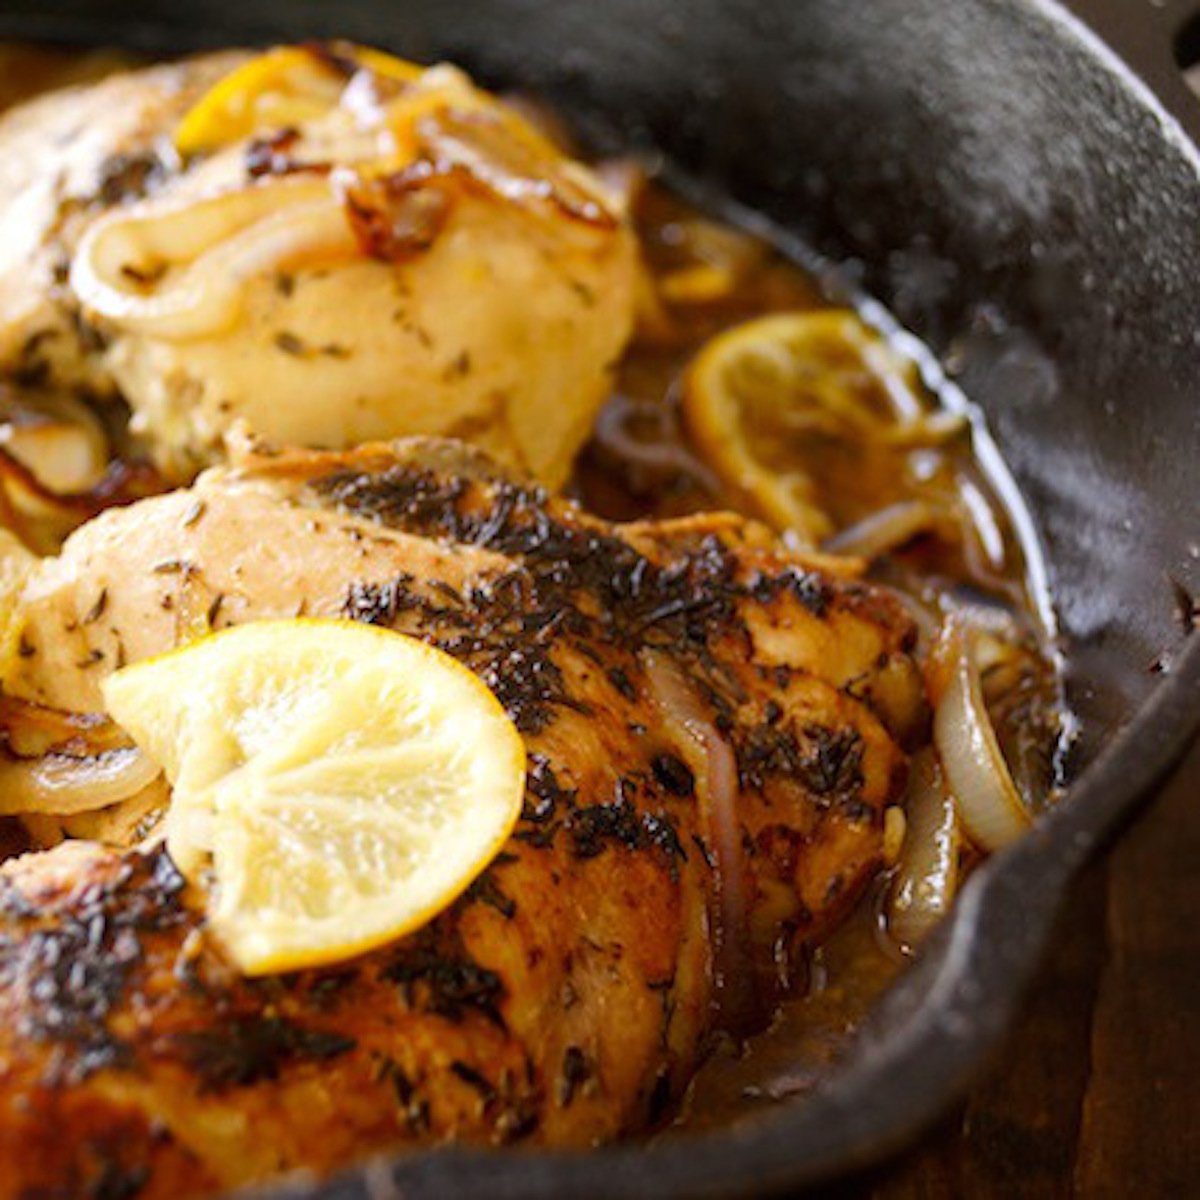 Skillet Braised Chicken in cast iron pan with slices of lemon.